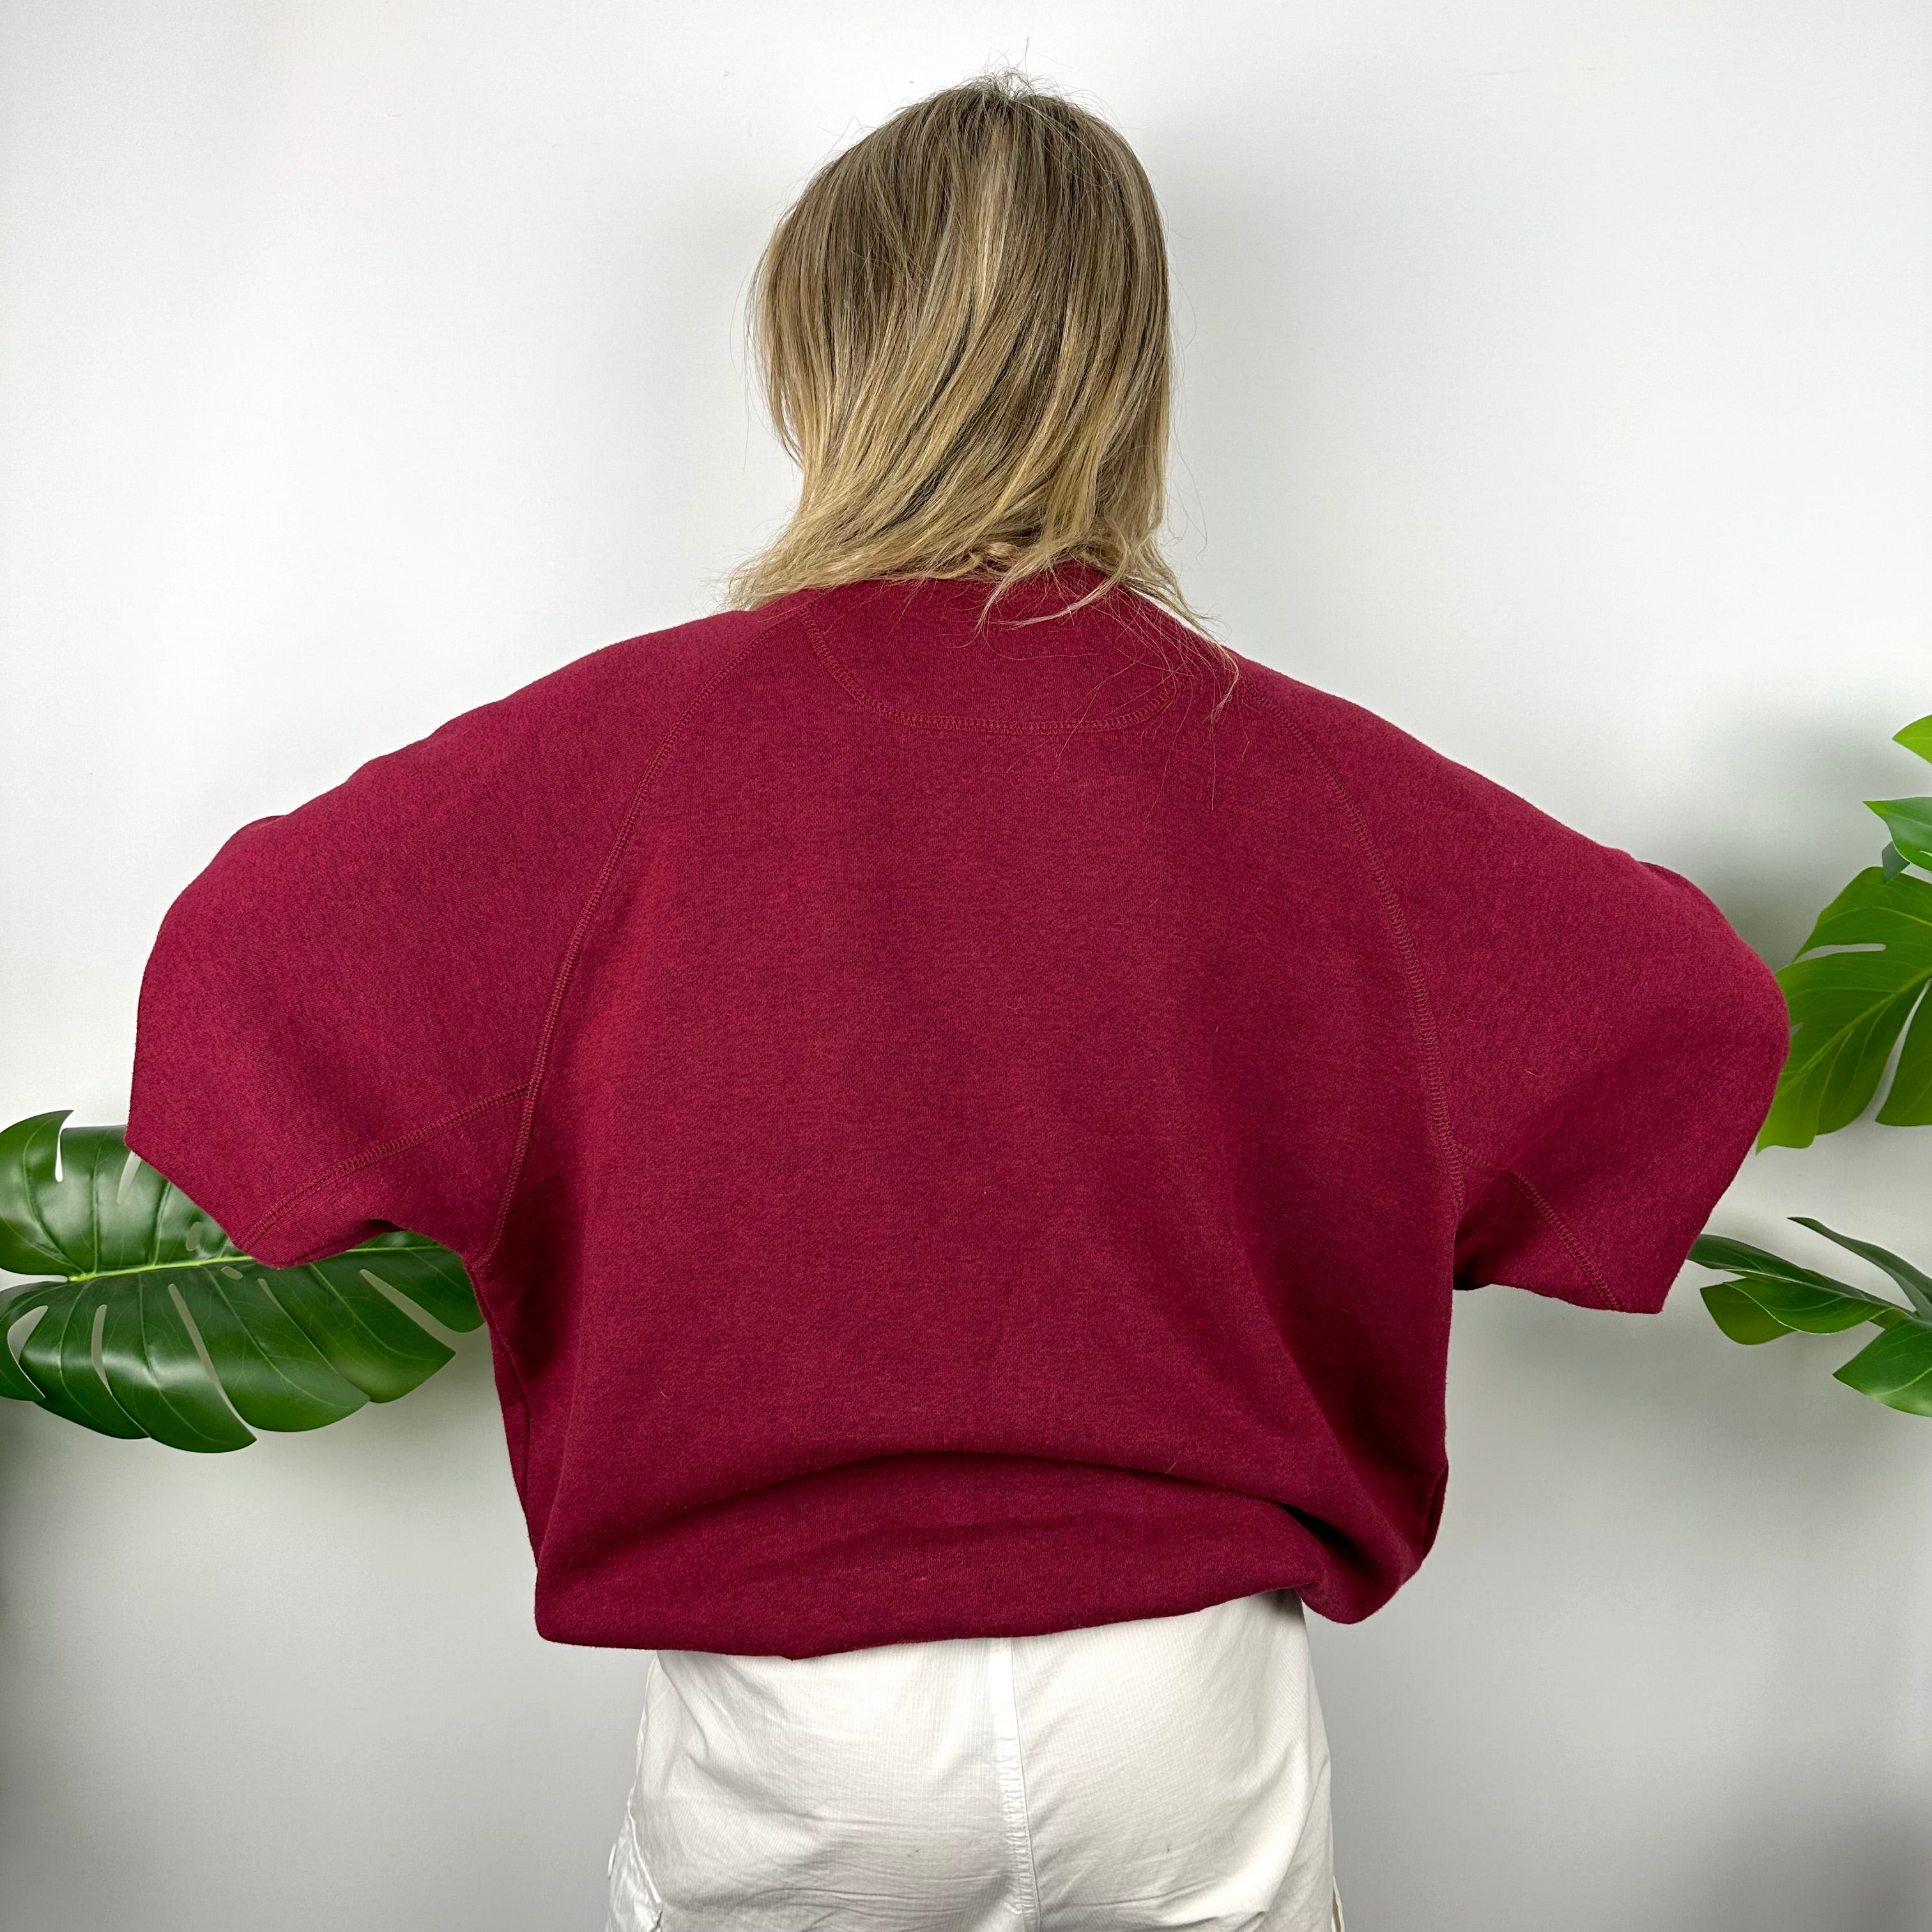 Adidas Maroon Embroidered Spell Out Sweatshirt (L)